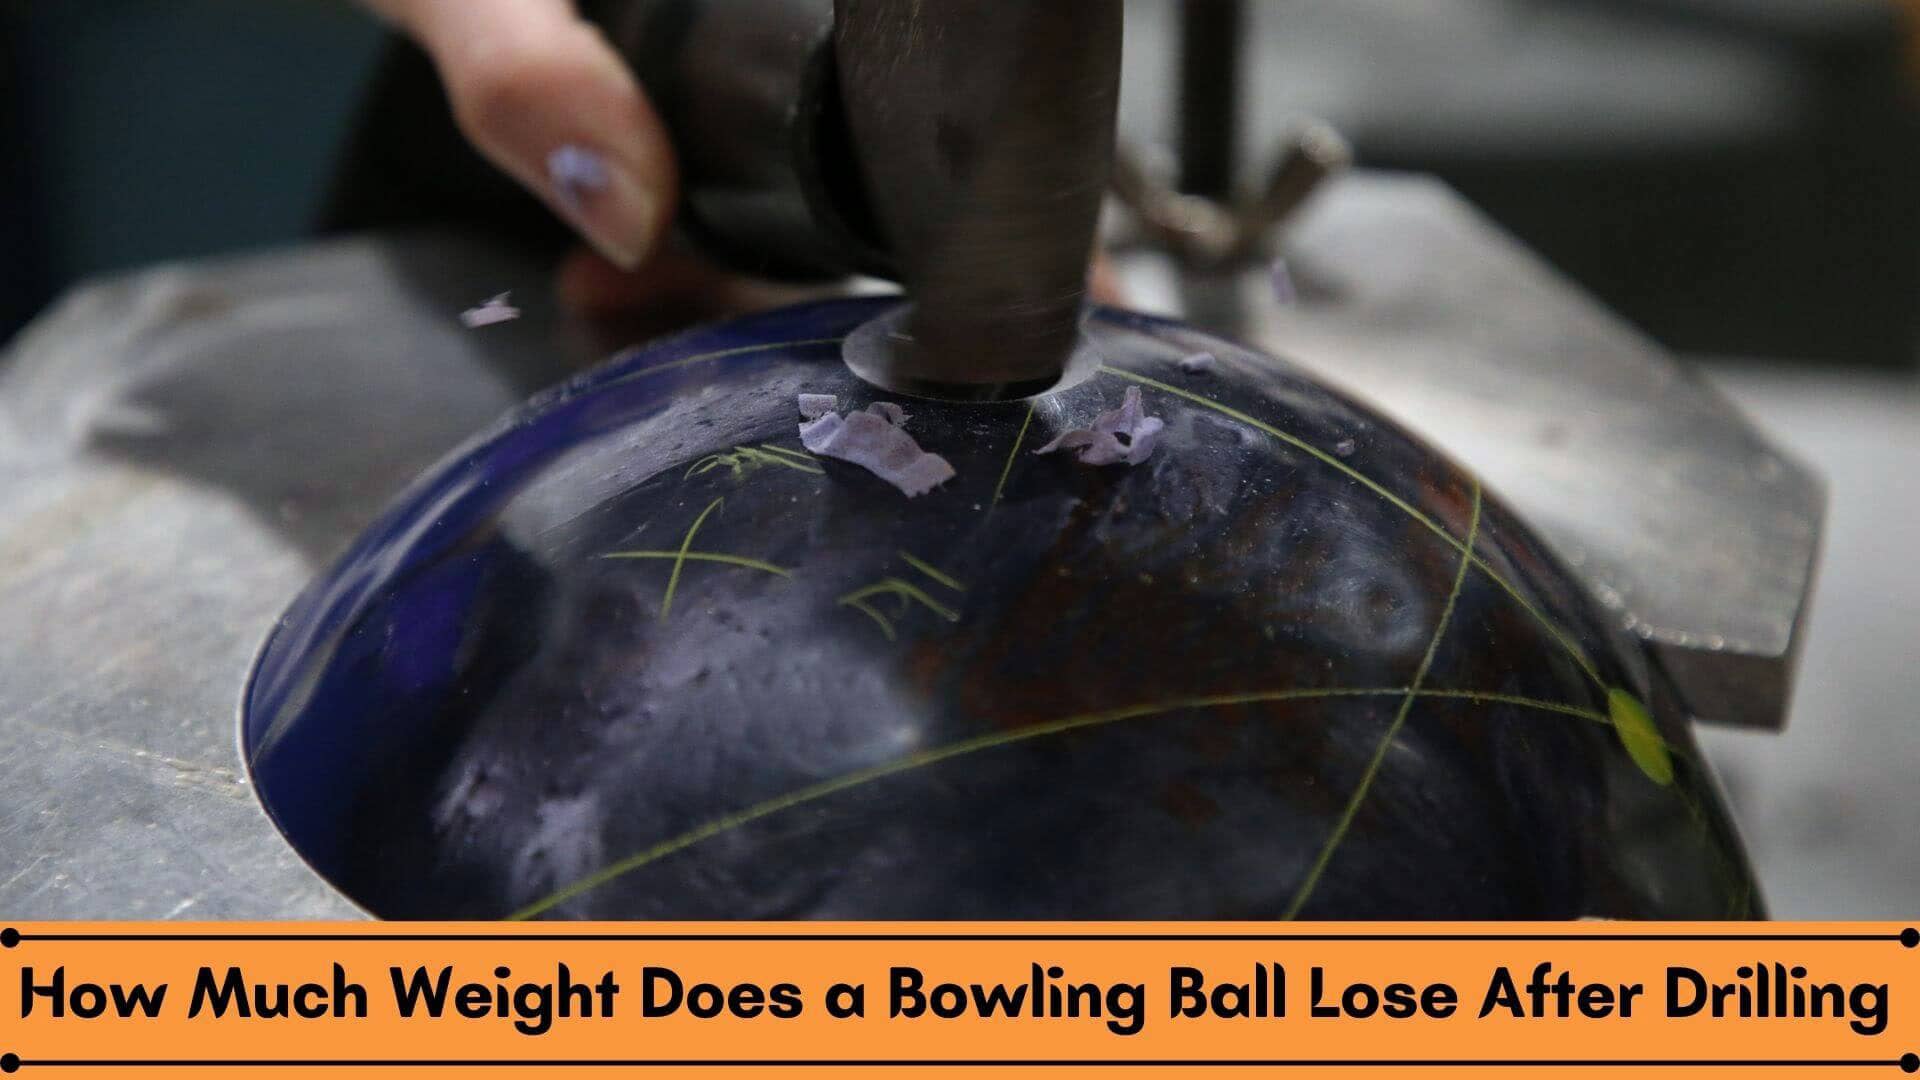 How Much Weight Does a Bowling Ball Lose After Drilling?